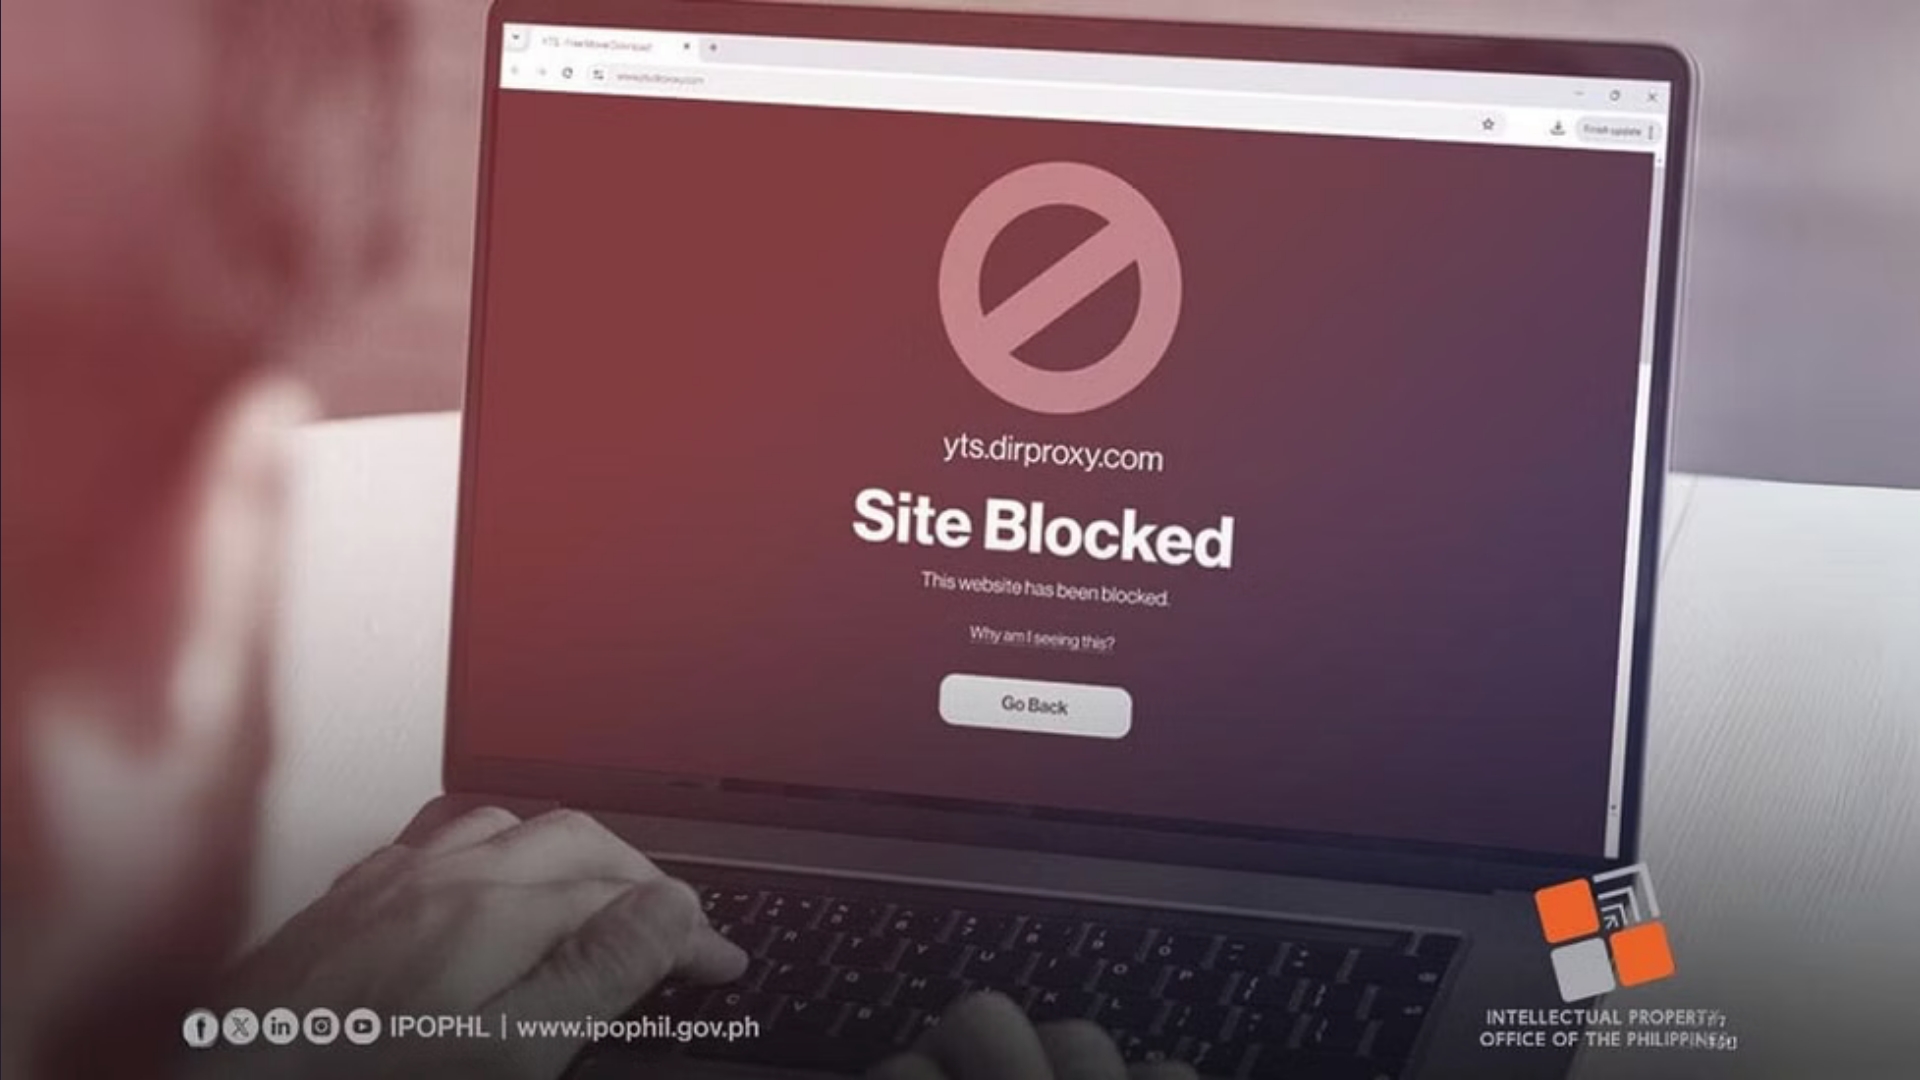 With a request for site blocking, IPOPHL targets the torrent site YTS.